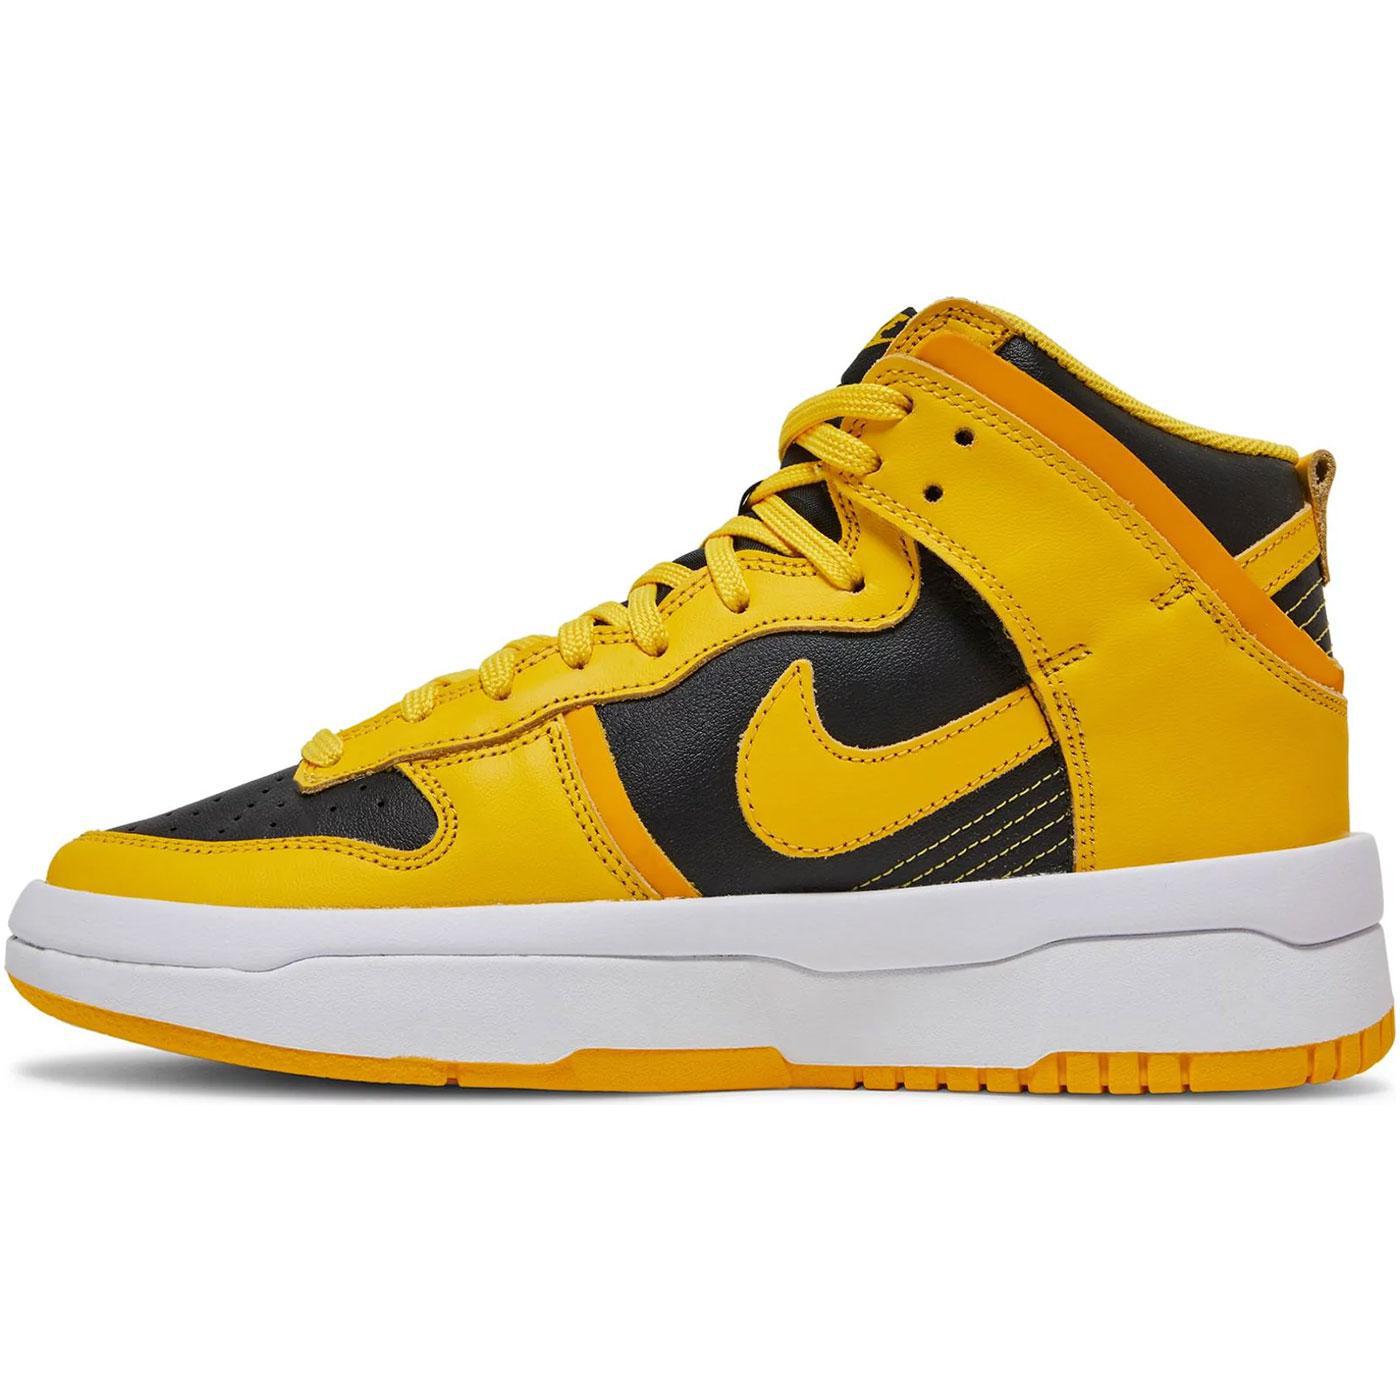 Wmns Dunk High Up 'Goldenrod' DH3718 001 Side | Nike